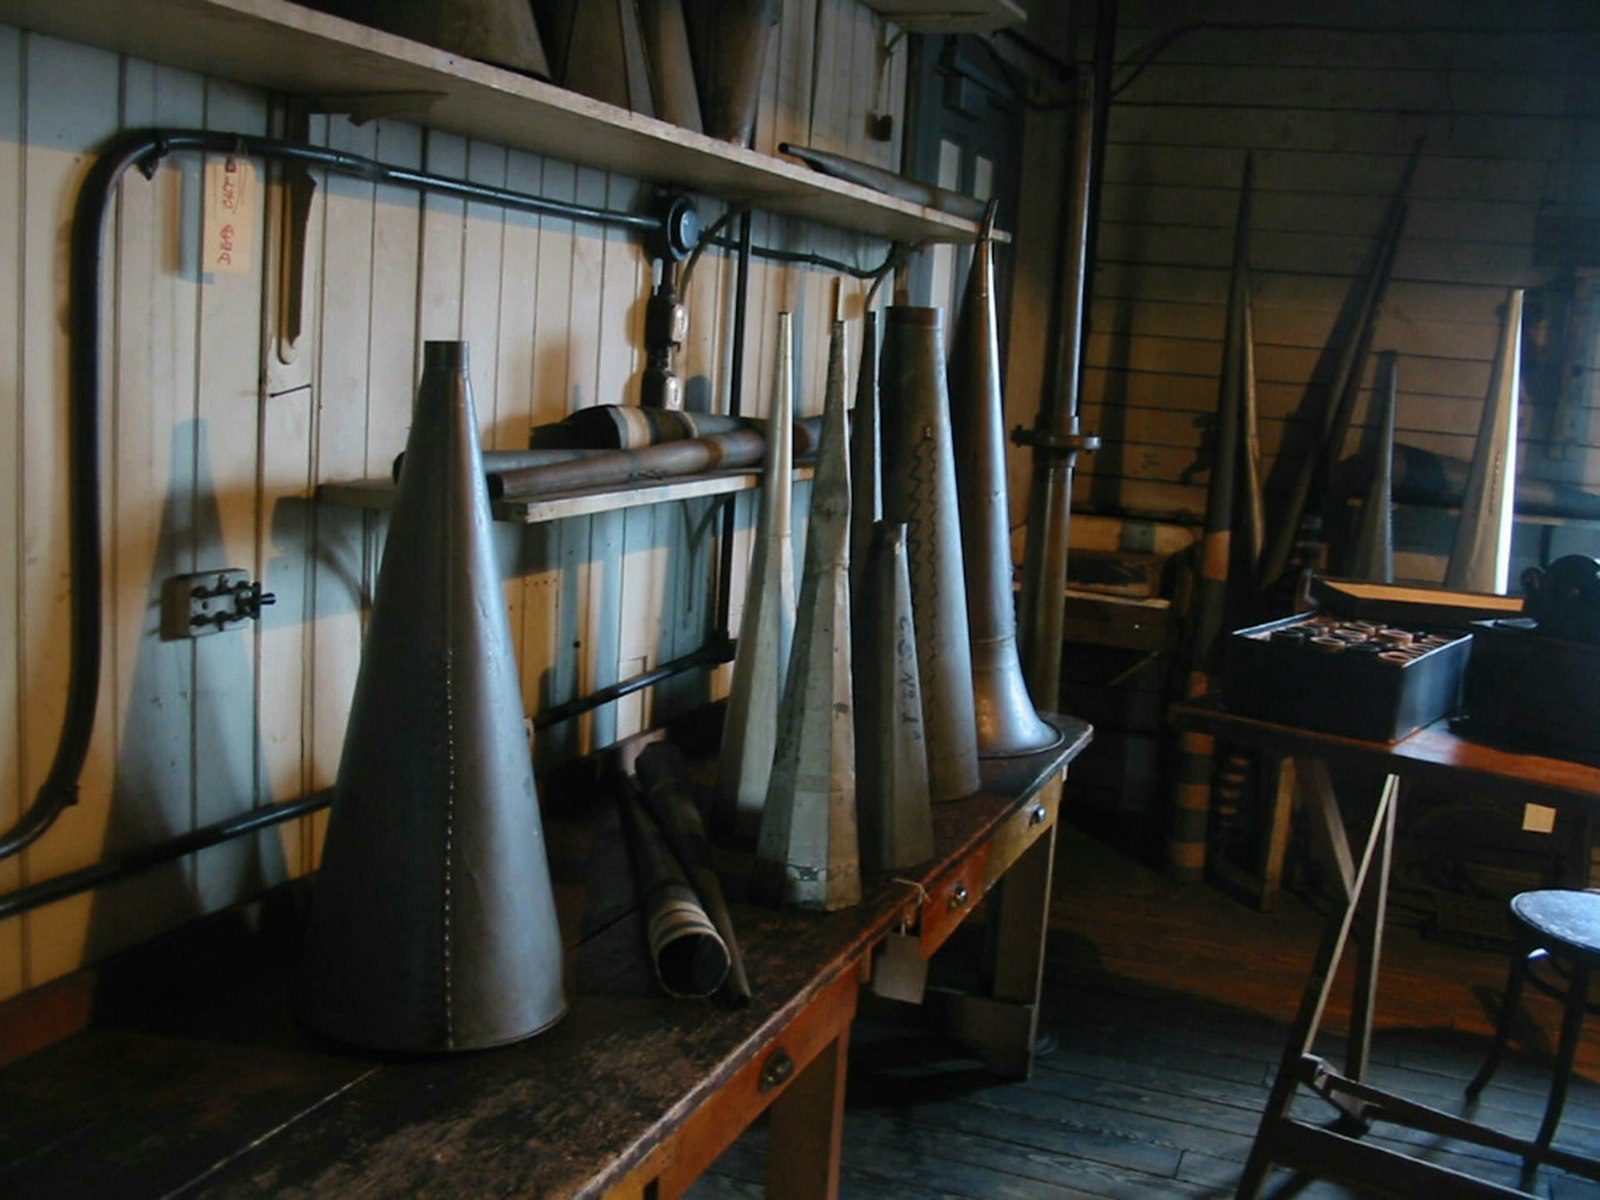 In a workshop, a collection of ear horns